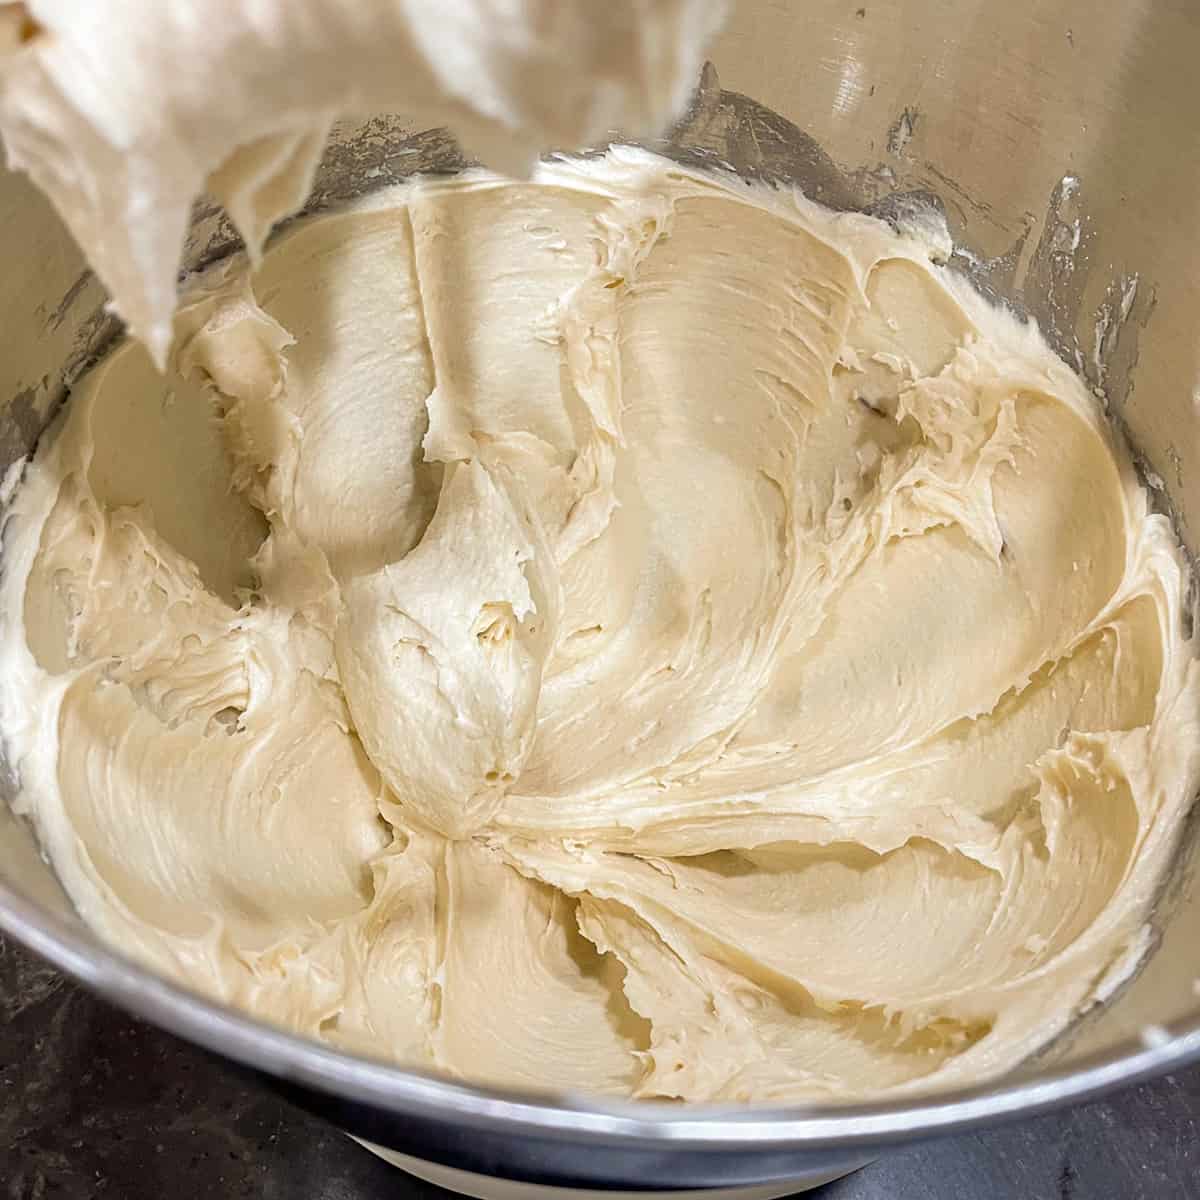 Mixer bowl with butter, sugars, and cream cheese looking really creamy after 3 minutes with the mixer.